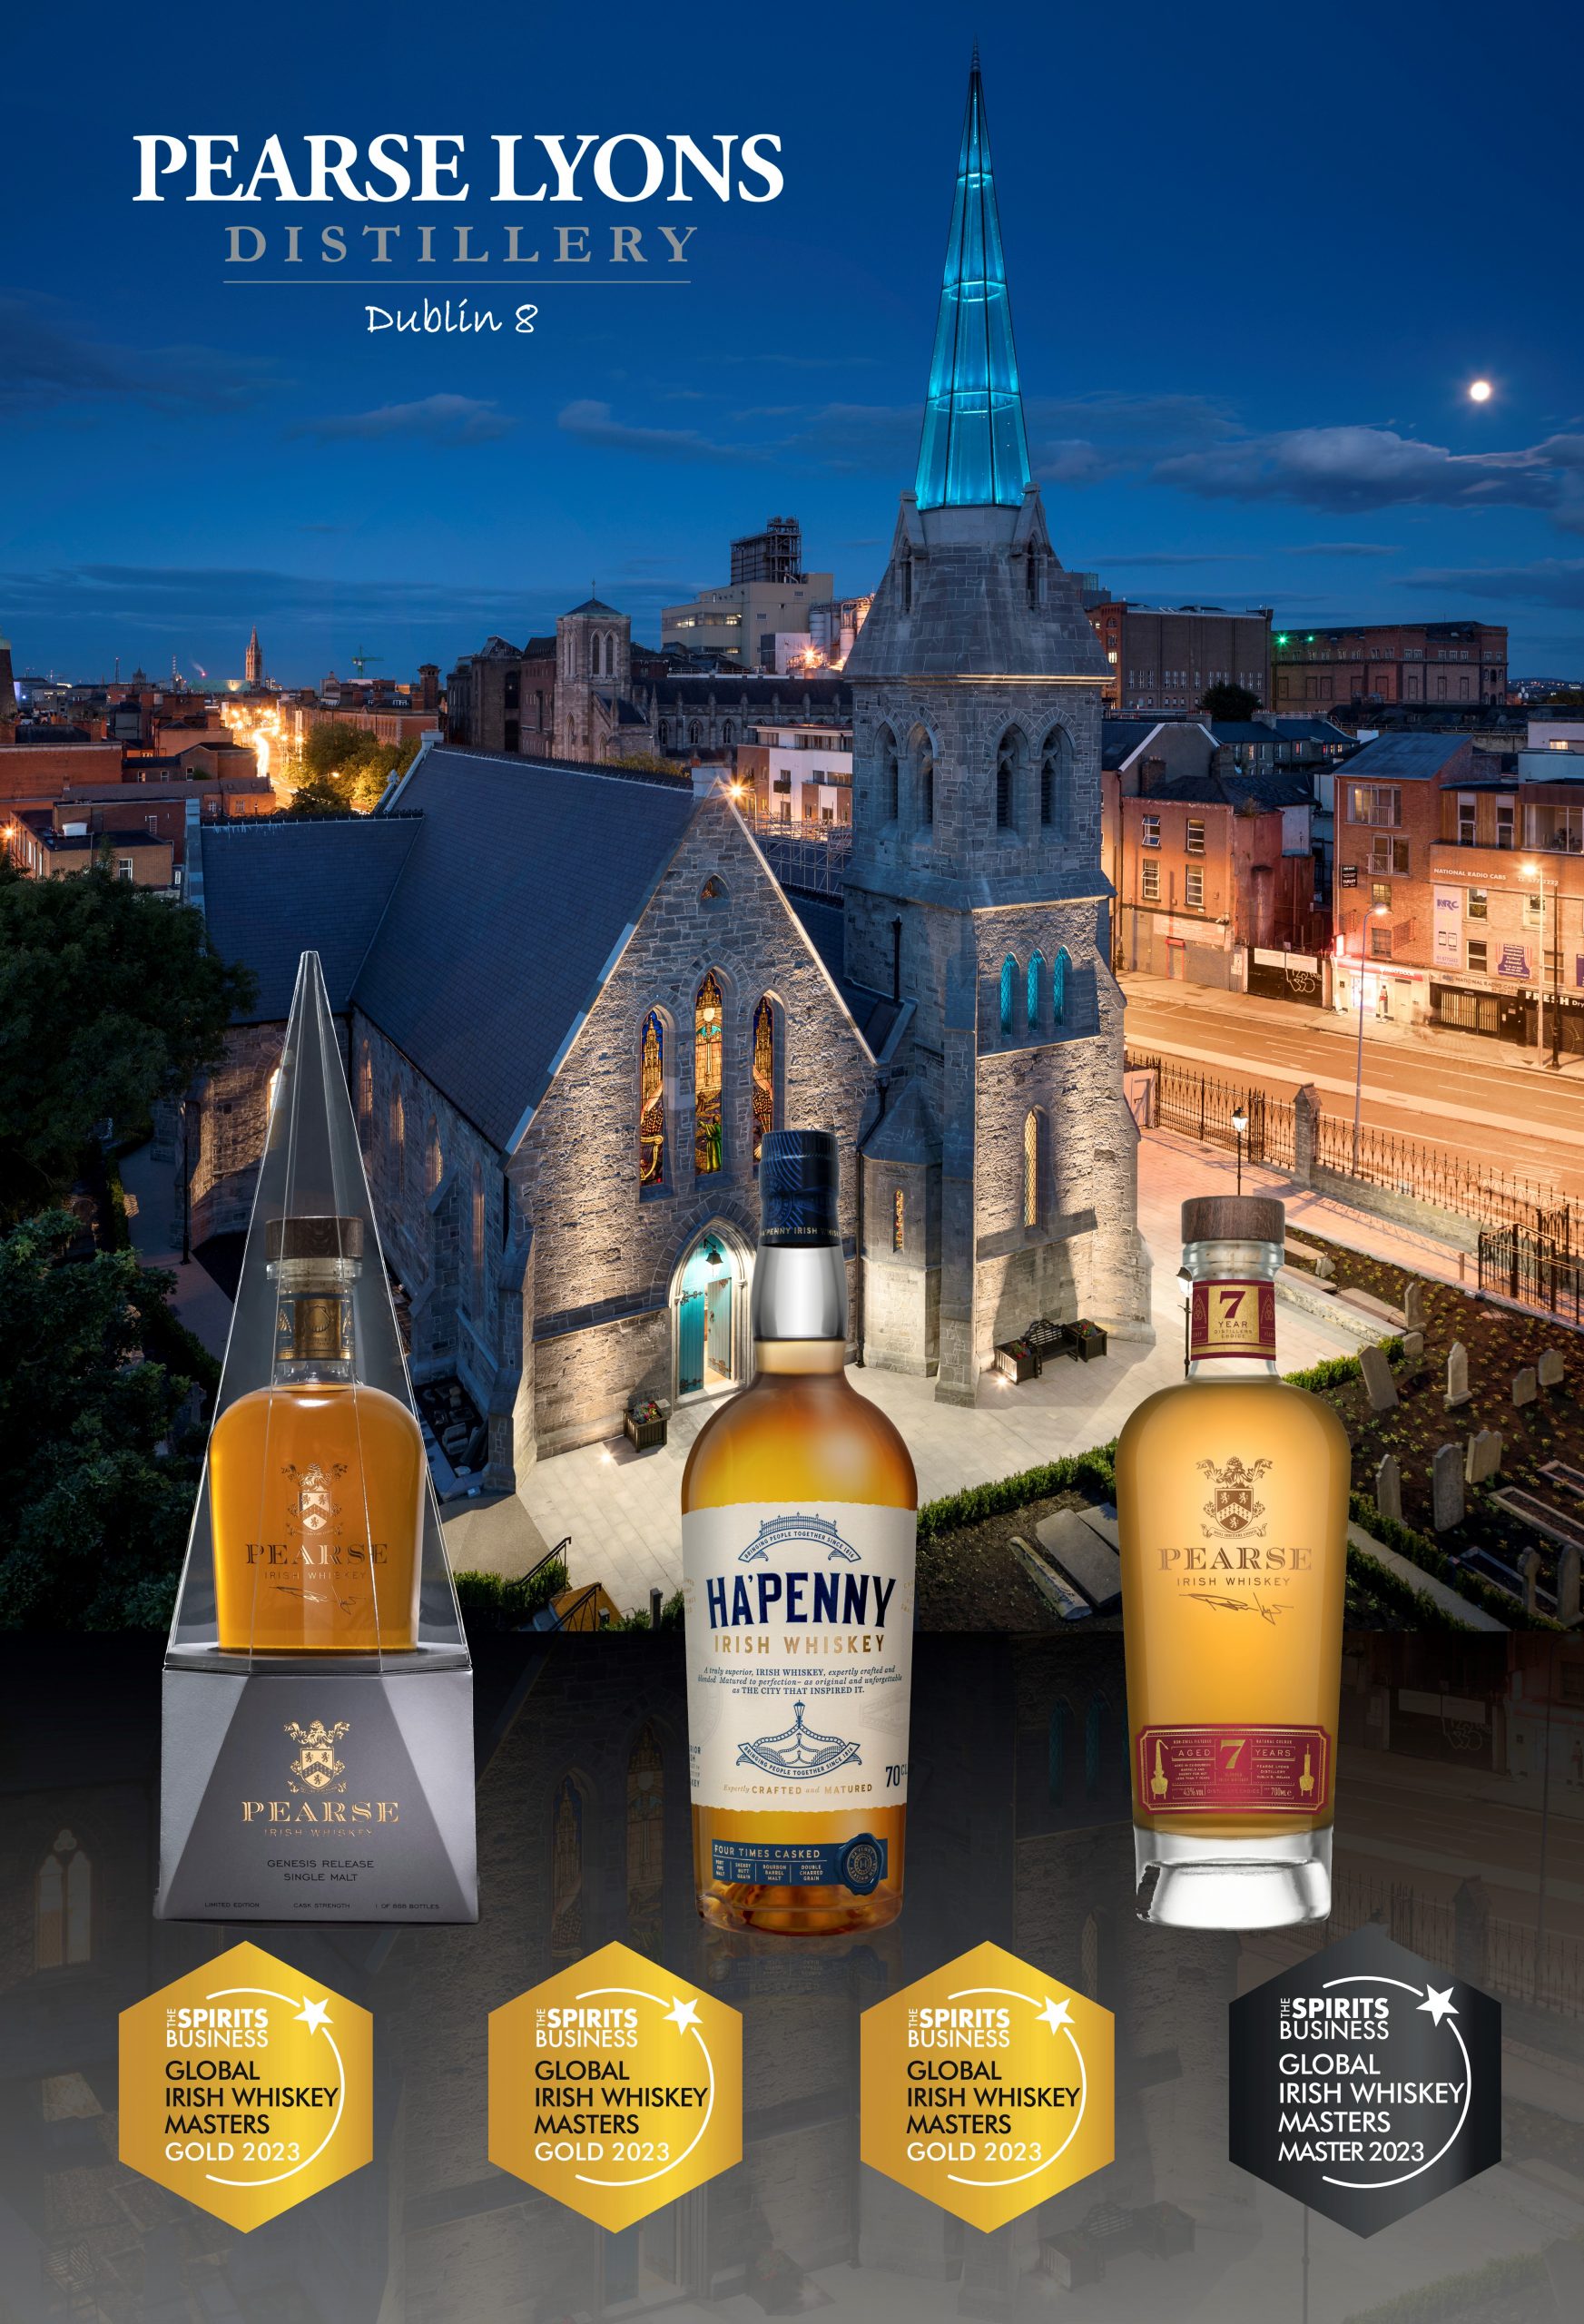 Pearse Lyons Distillery takes home four coveted awards at The Spirits Business Irish Whiskey Masters 2023.